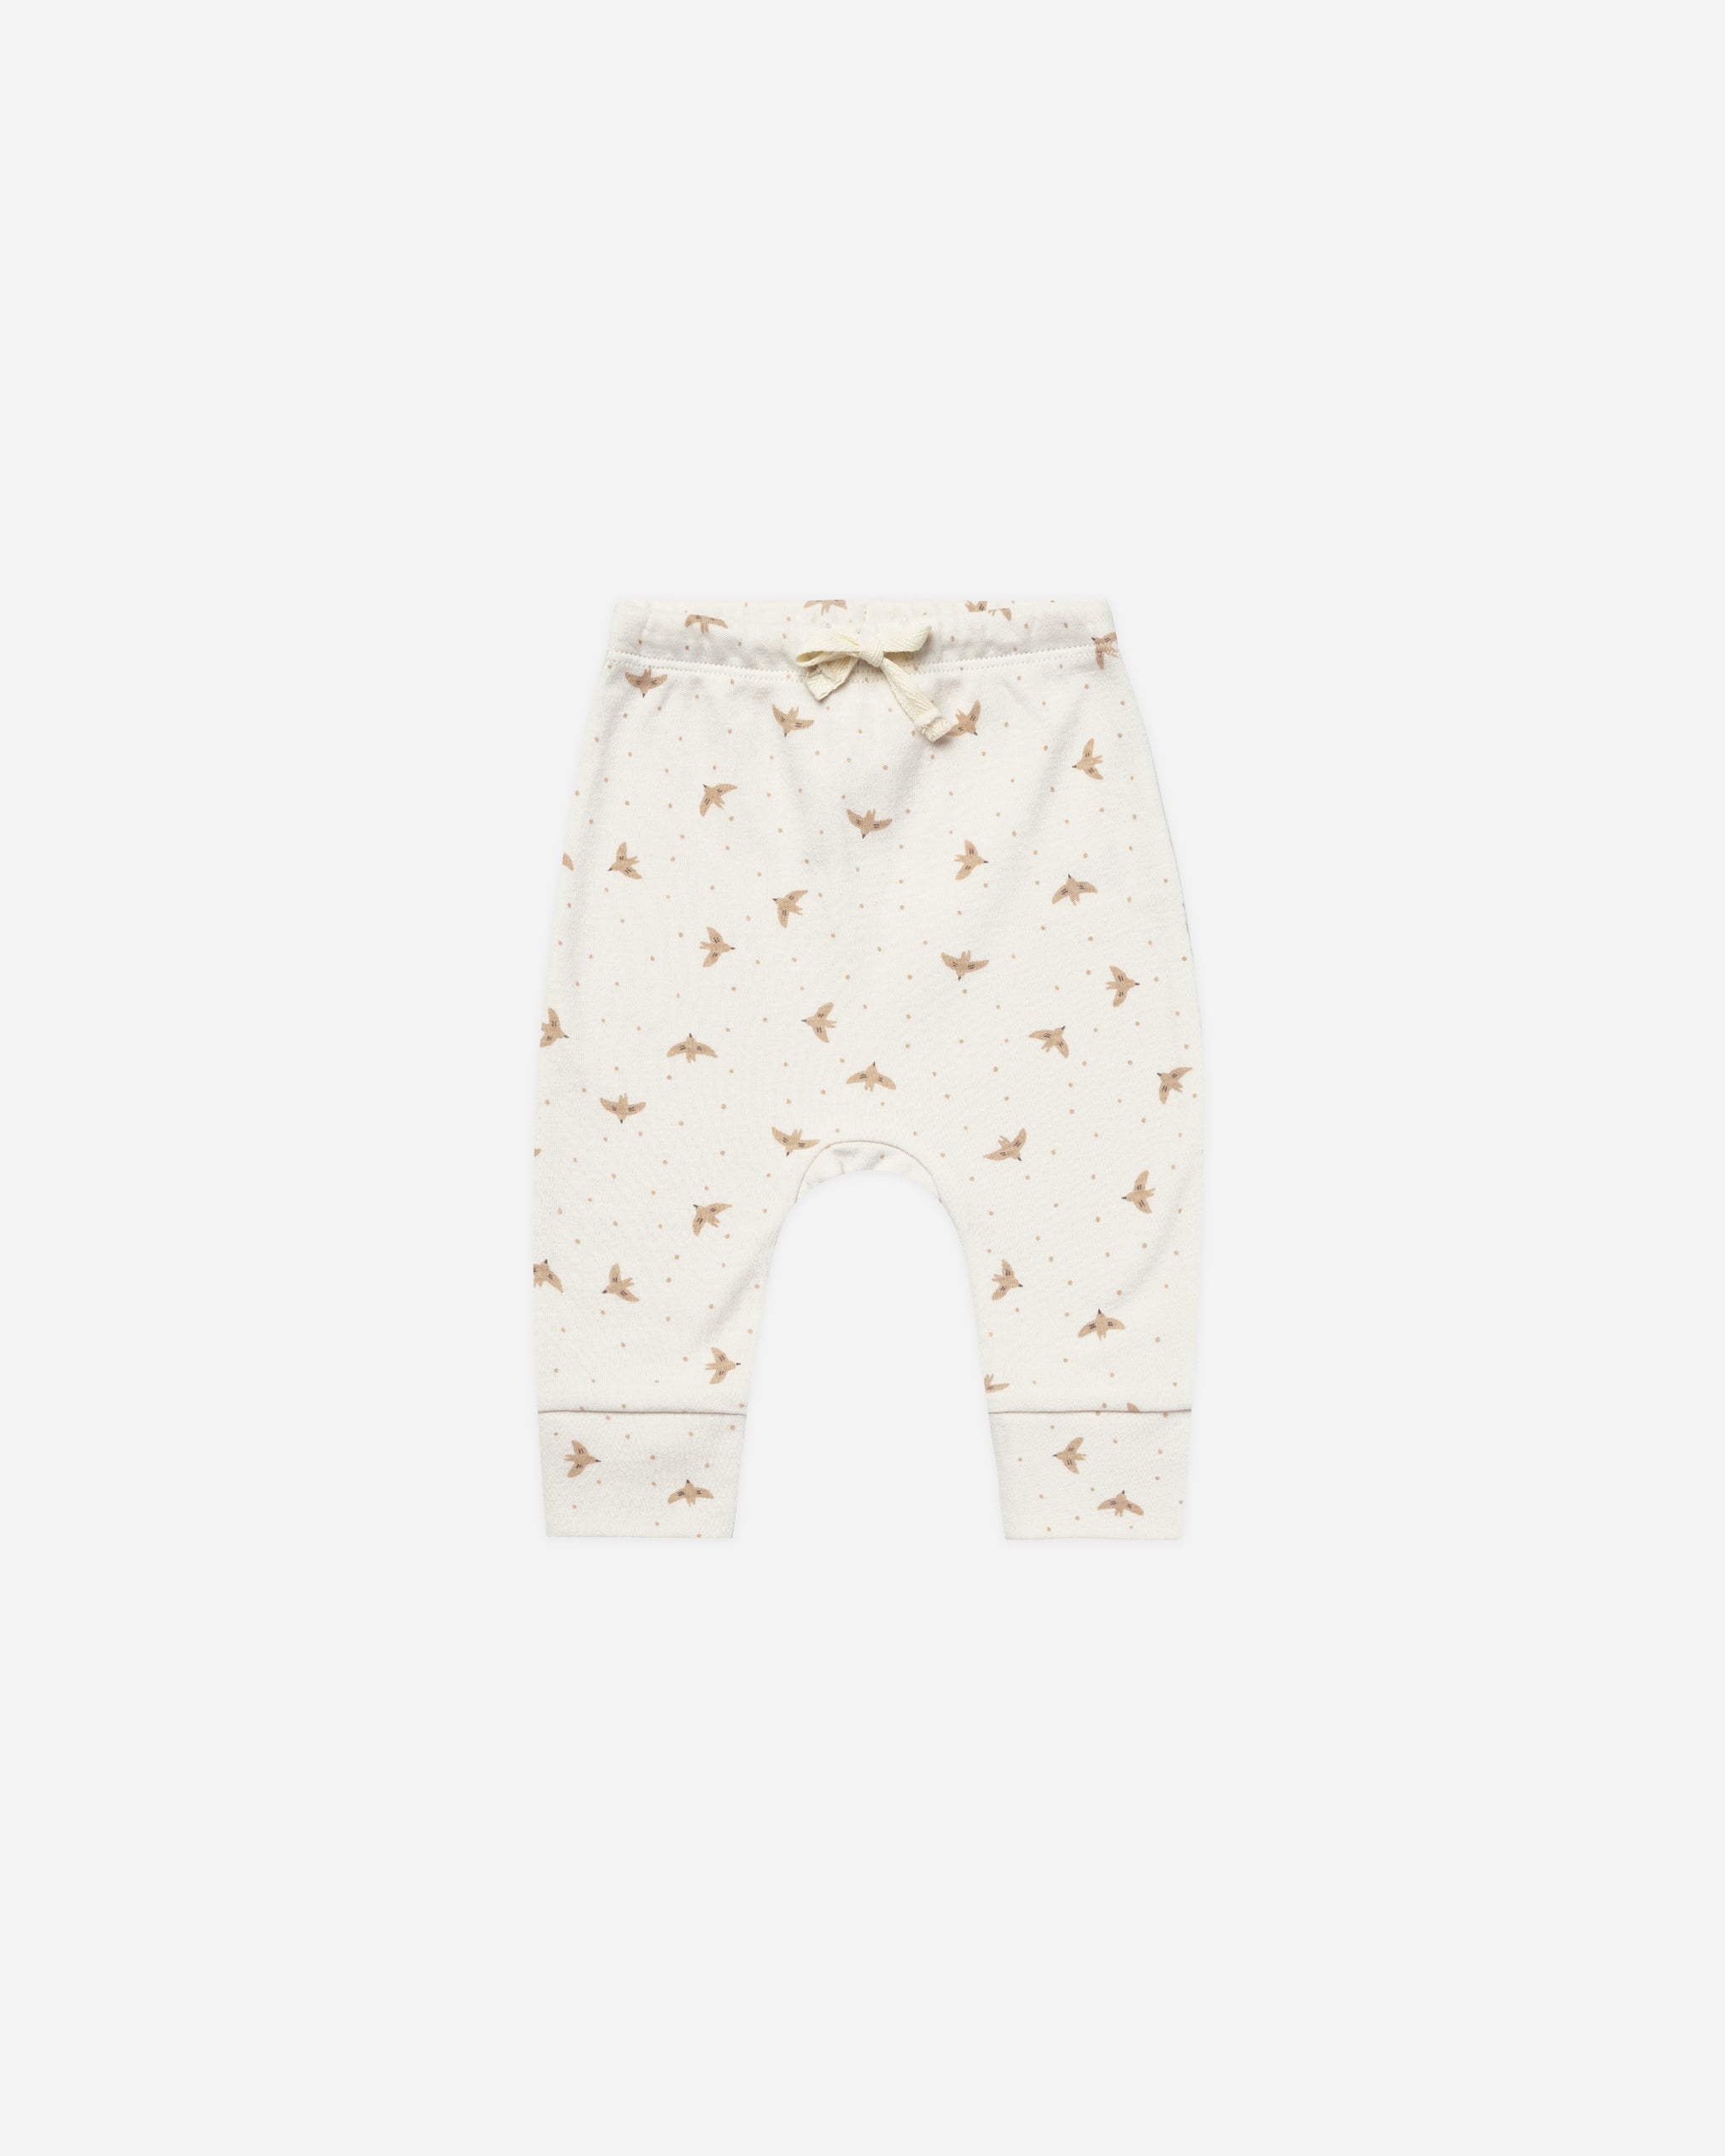 Drawstring Pant || Doves - Rylee + Cru | Kids Clothes | Trendy Baby Clothes | Modern Infant Outfits |